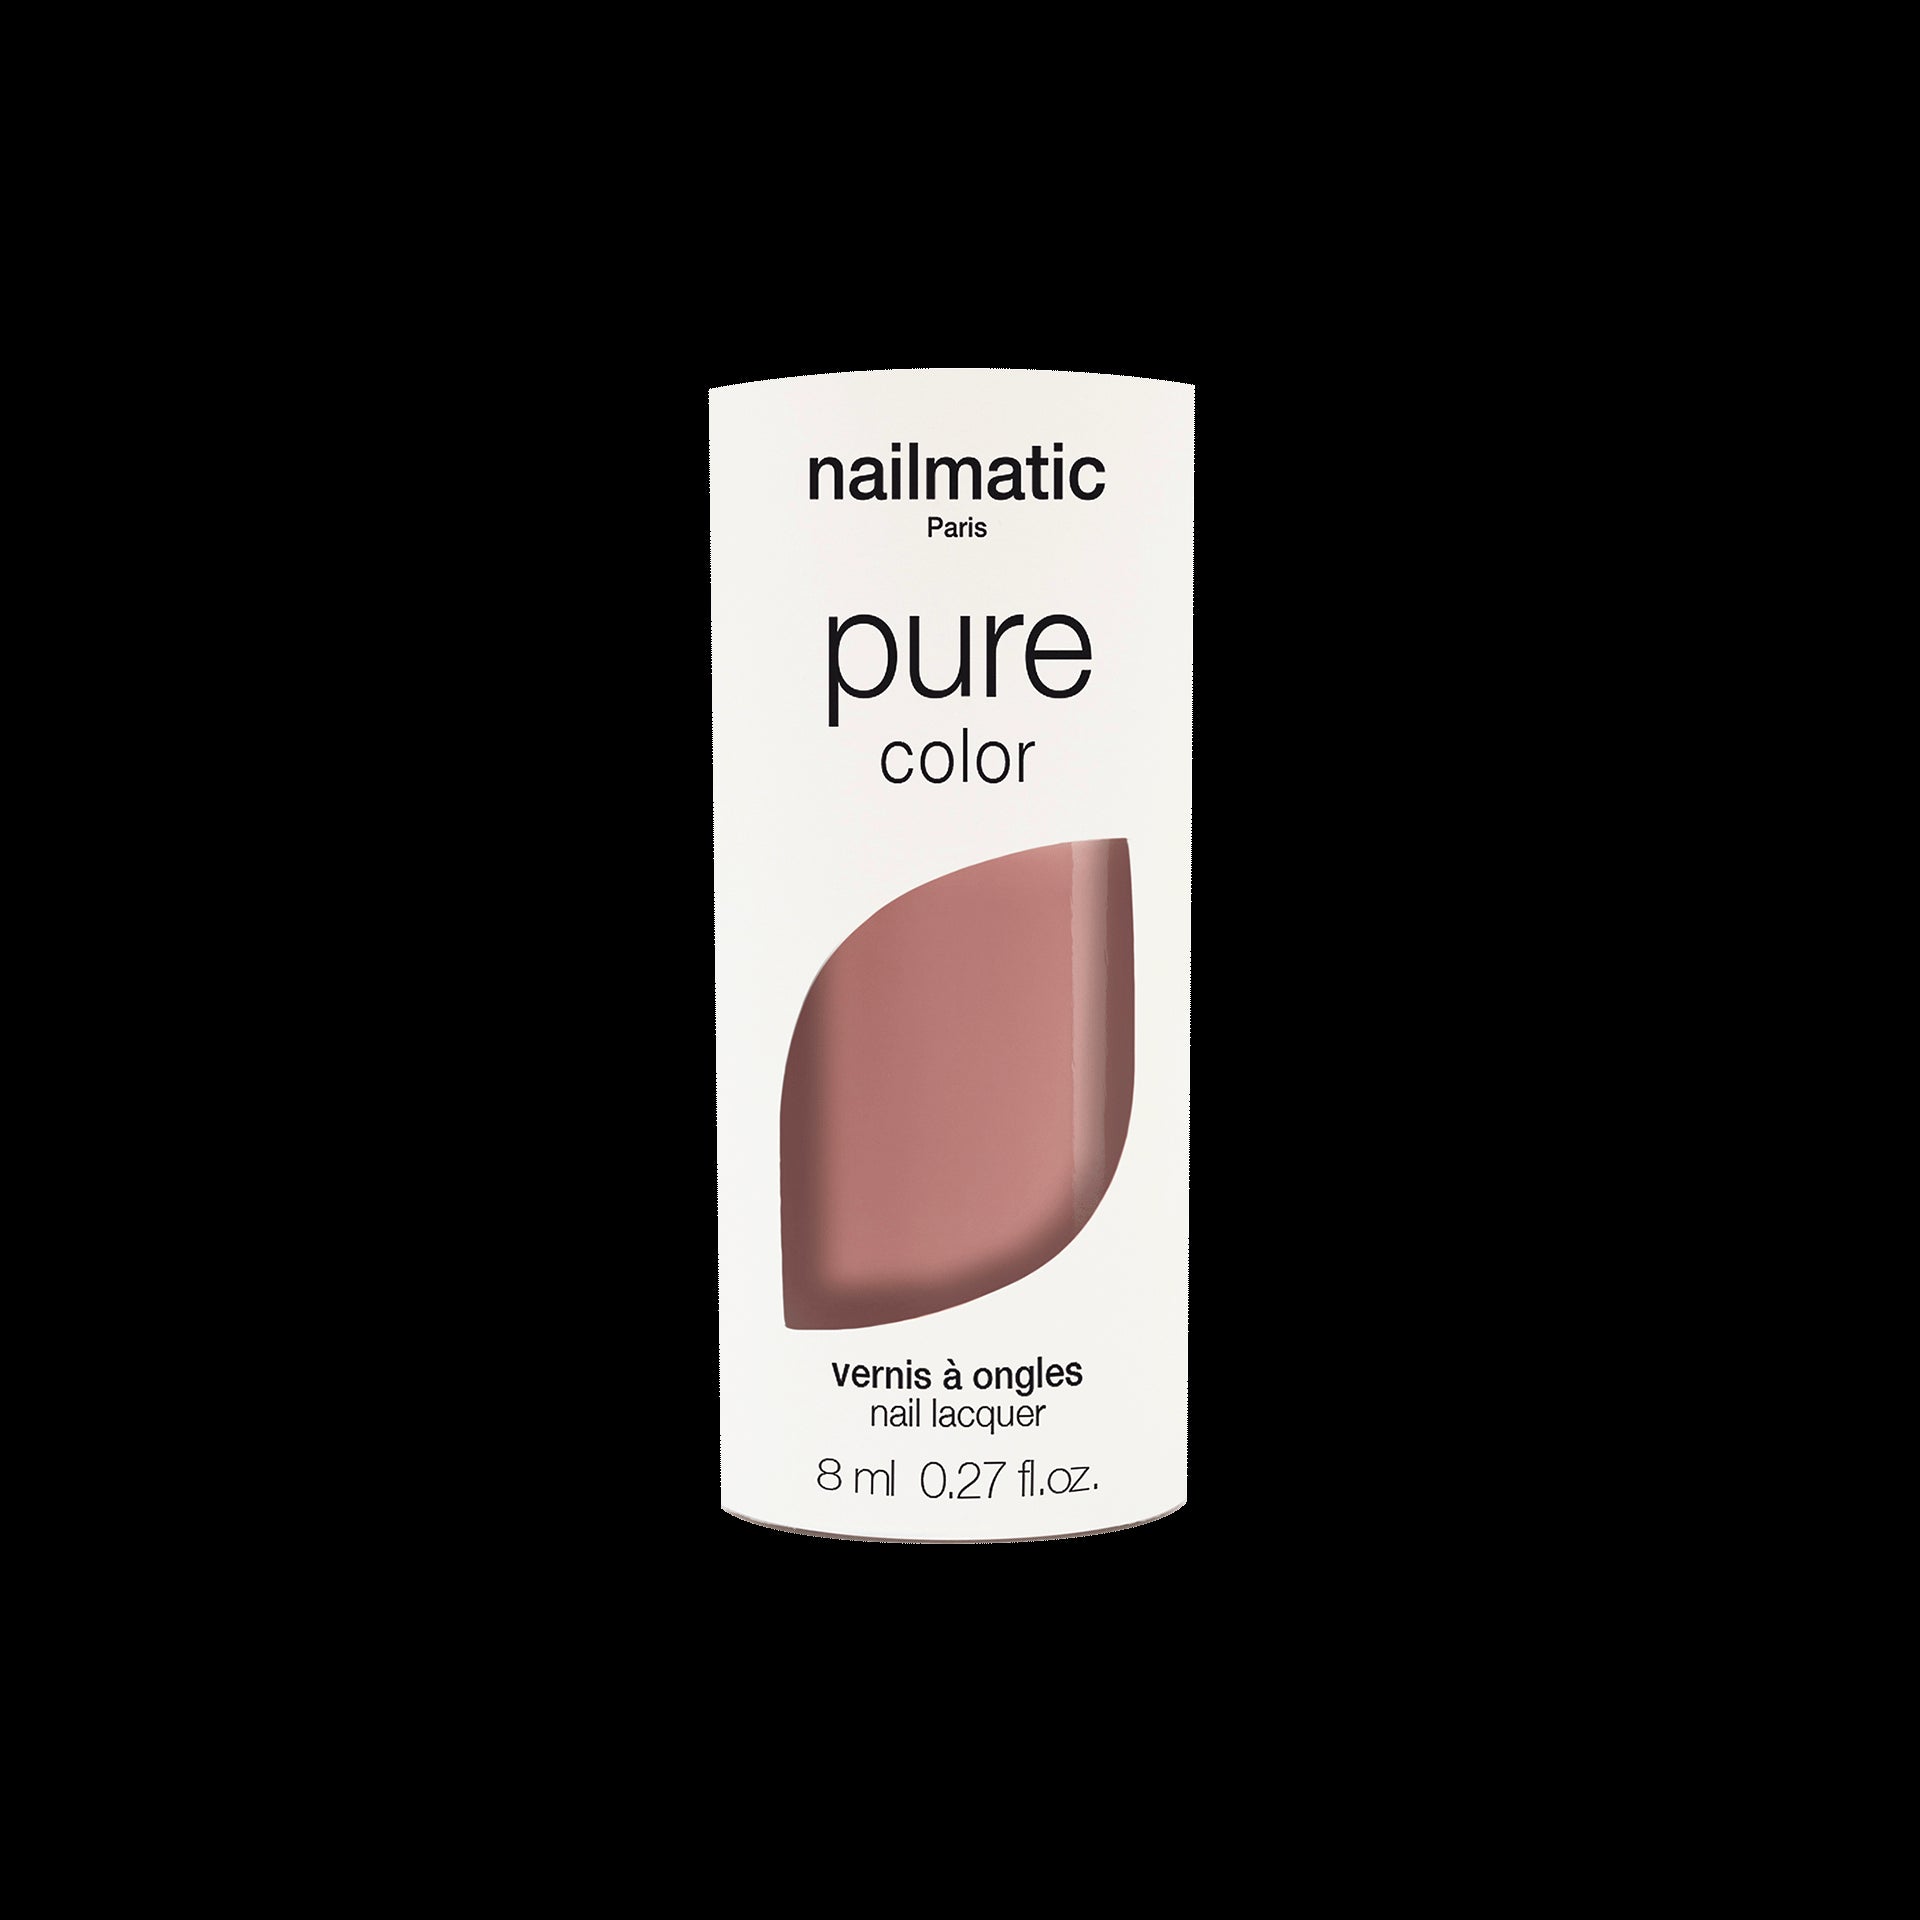 pink hazlnut nail polish Imani Pure Color with packaging